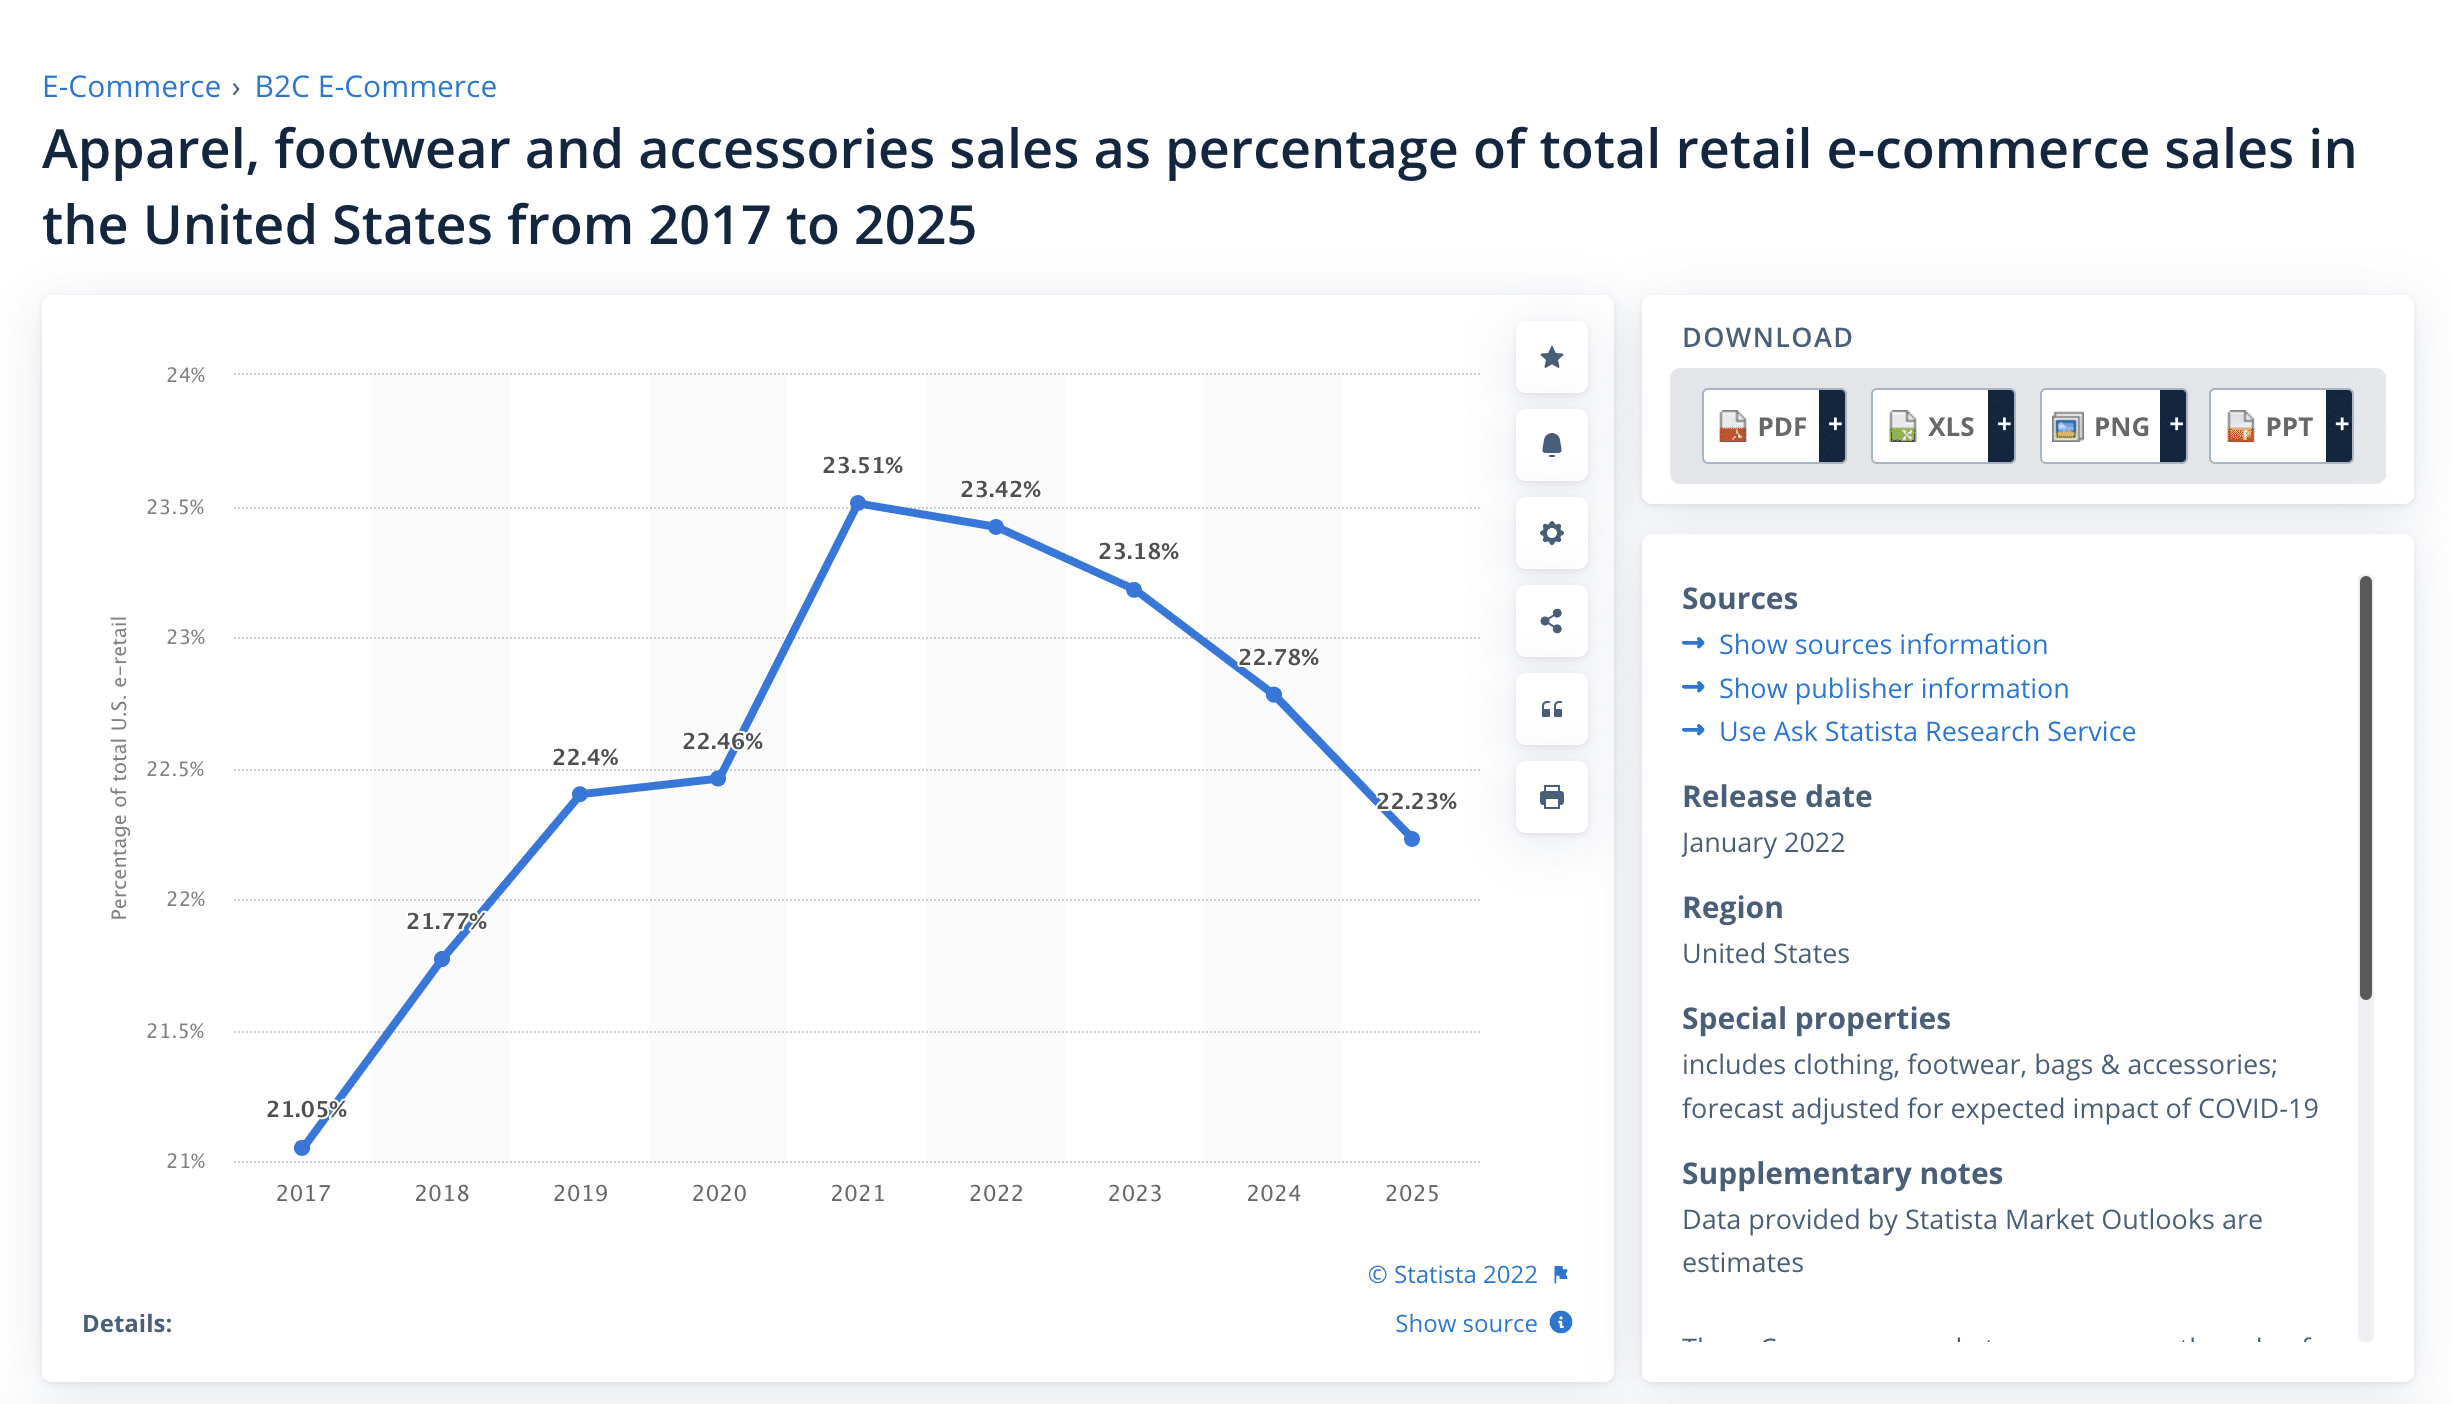 Apparel, footwear and accessories sales as percentage of total retail e-commerce sales in the United States from 2017 to 2025